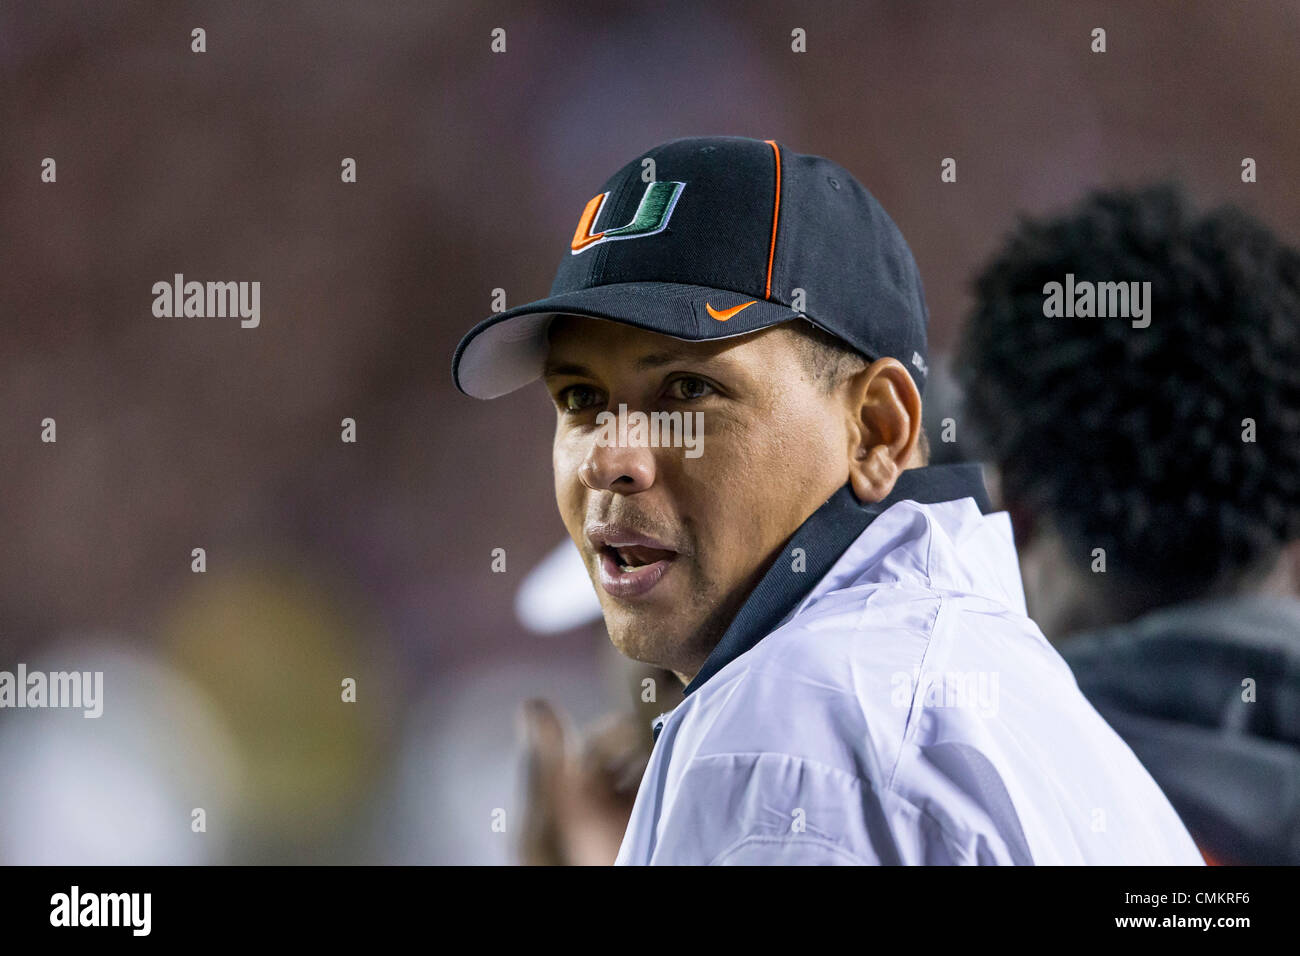 Tallahassee, Florida, USA. 2nd Nov, 2013. Miami Hurricanes fan and NY Yankee baseball player Alex Rodriguez watches the game between the Miami Hurricanes and the Florida State Seminoles at Doak S. Campbell Stadium. Florida State defeated Miami 41-14. Credit:  Cal Sport Media/Alamy Live News Stock Photo